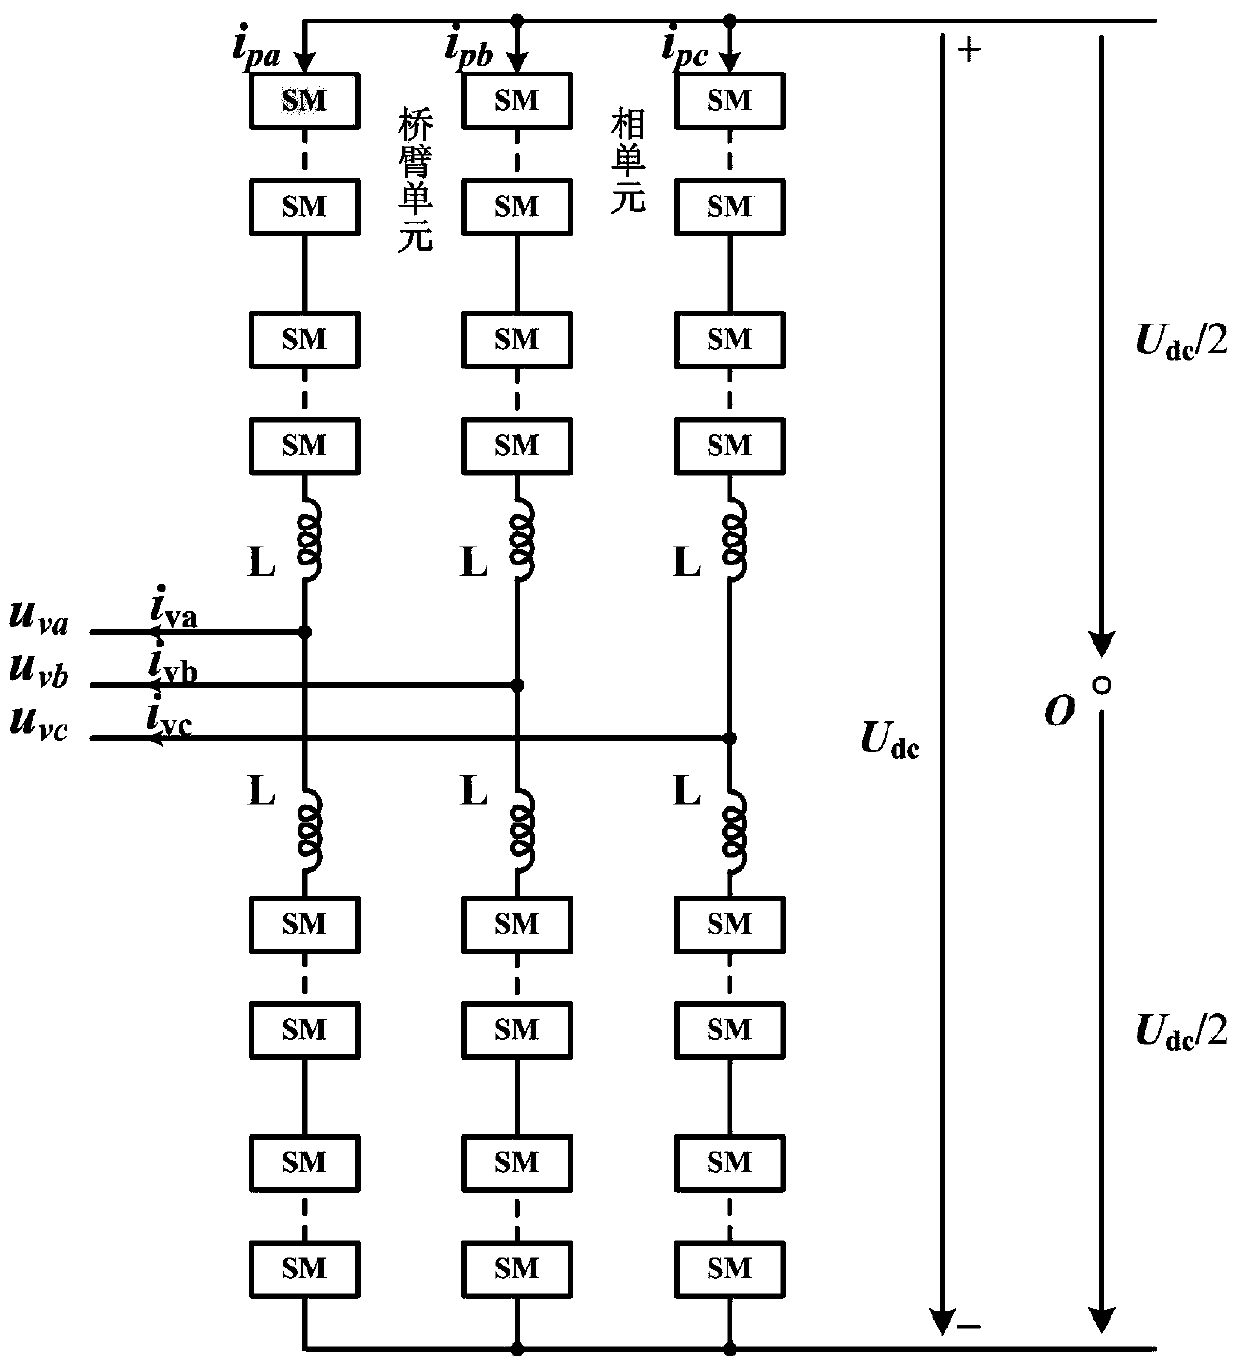 A hybrid power switch and its application in a flexible DC transmission converter